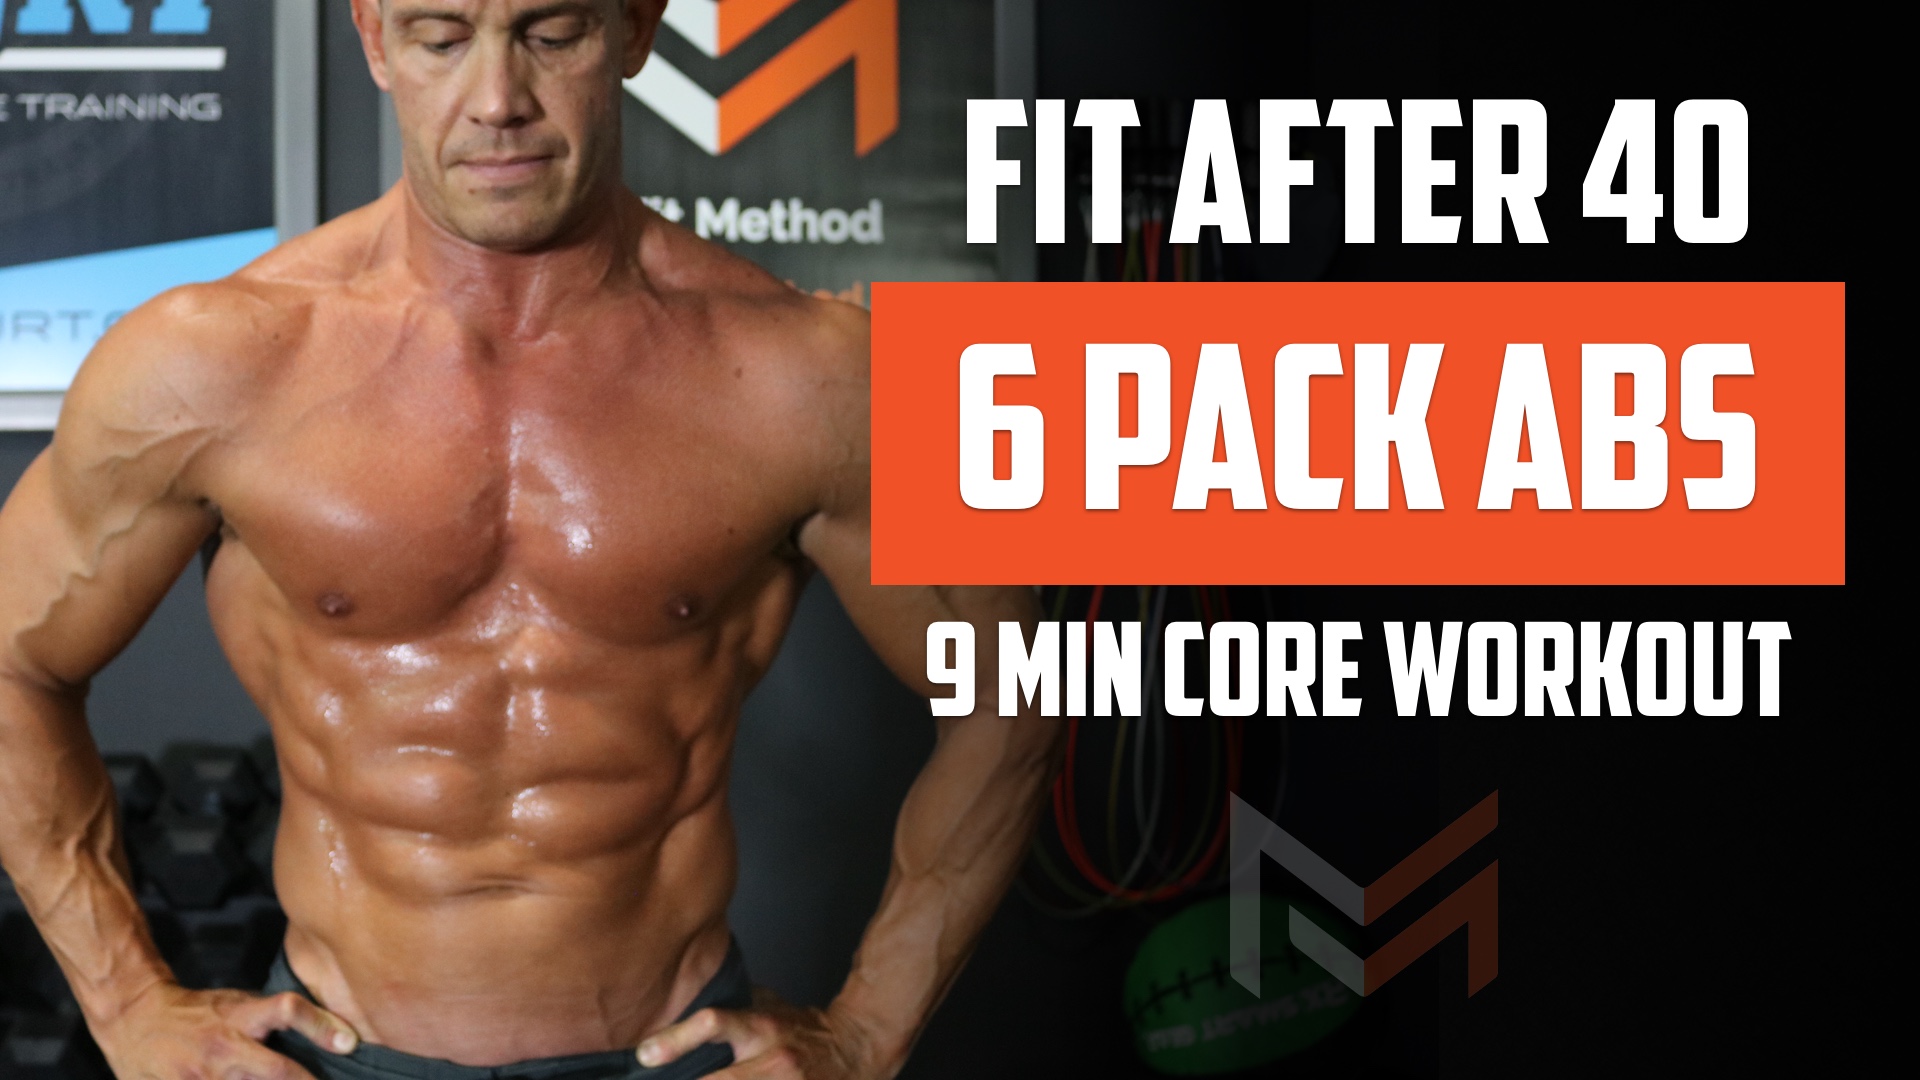 abworkout #abs #sixpack #sixpackabs #onlinefitnessclasses #fitat40 #f, workouts